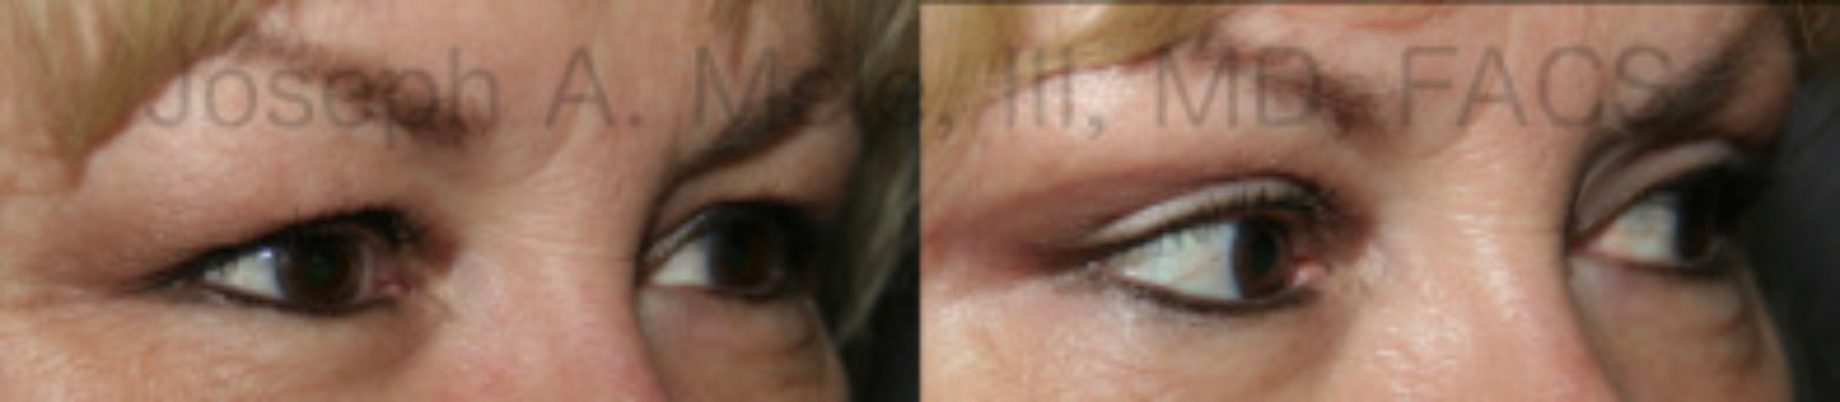 Eyelid Lift Before and After Pictures (Blepharoplasty)